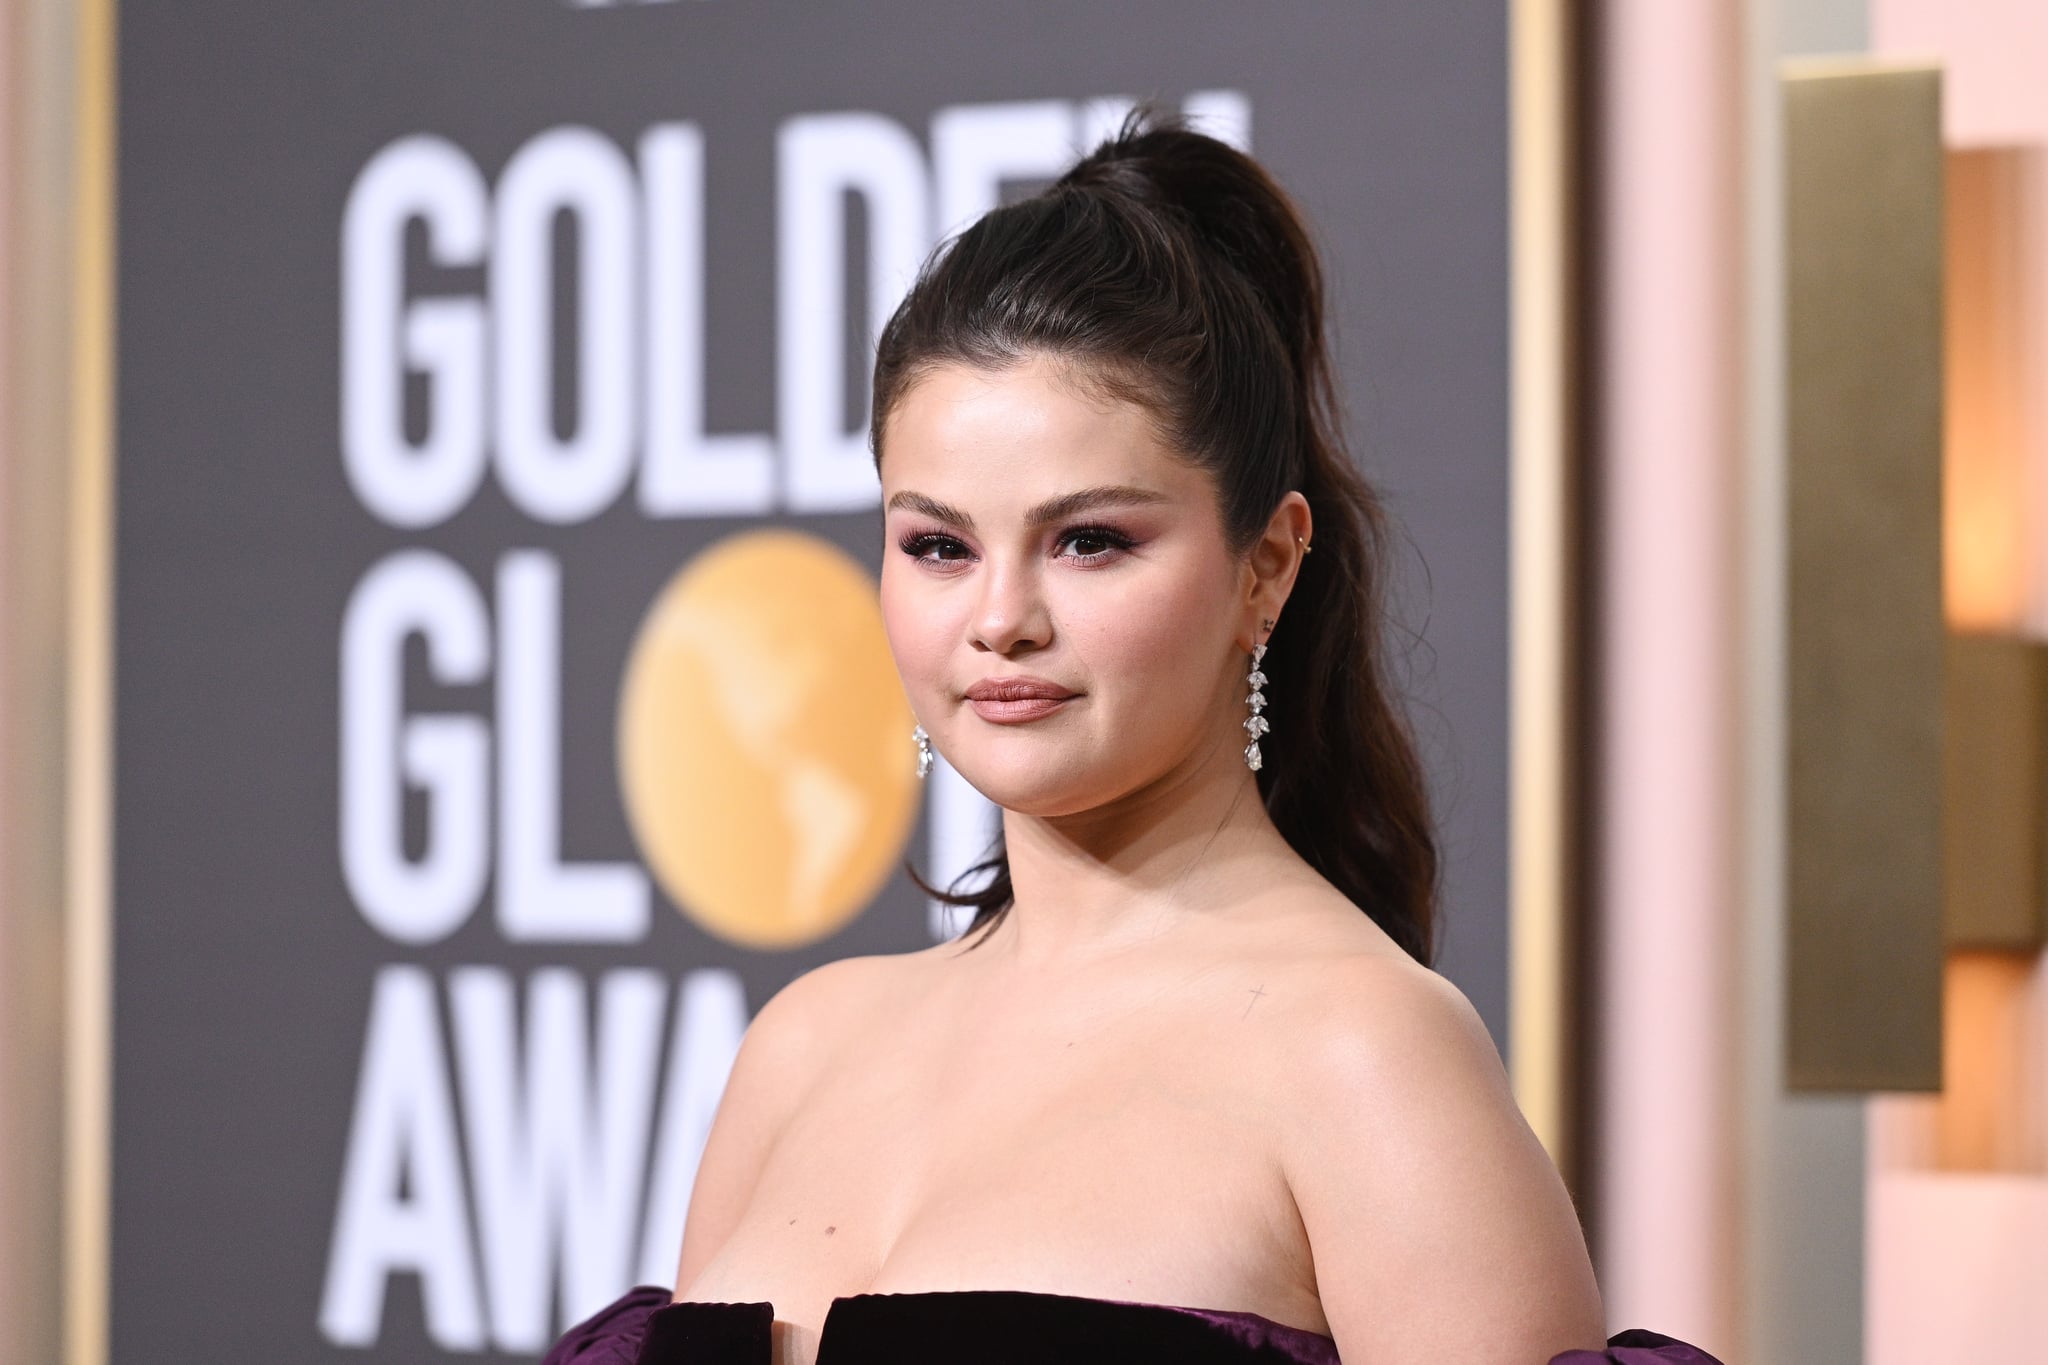 Selena Gomez Addresses Body Shamers "I Would Much Rather Be Healthy